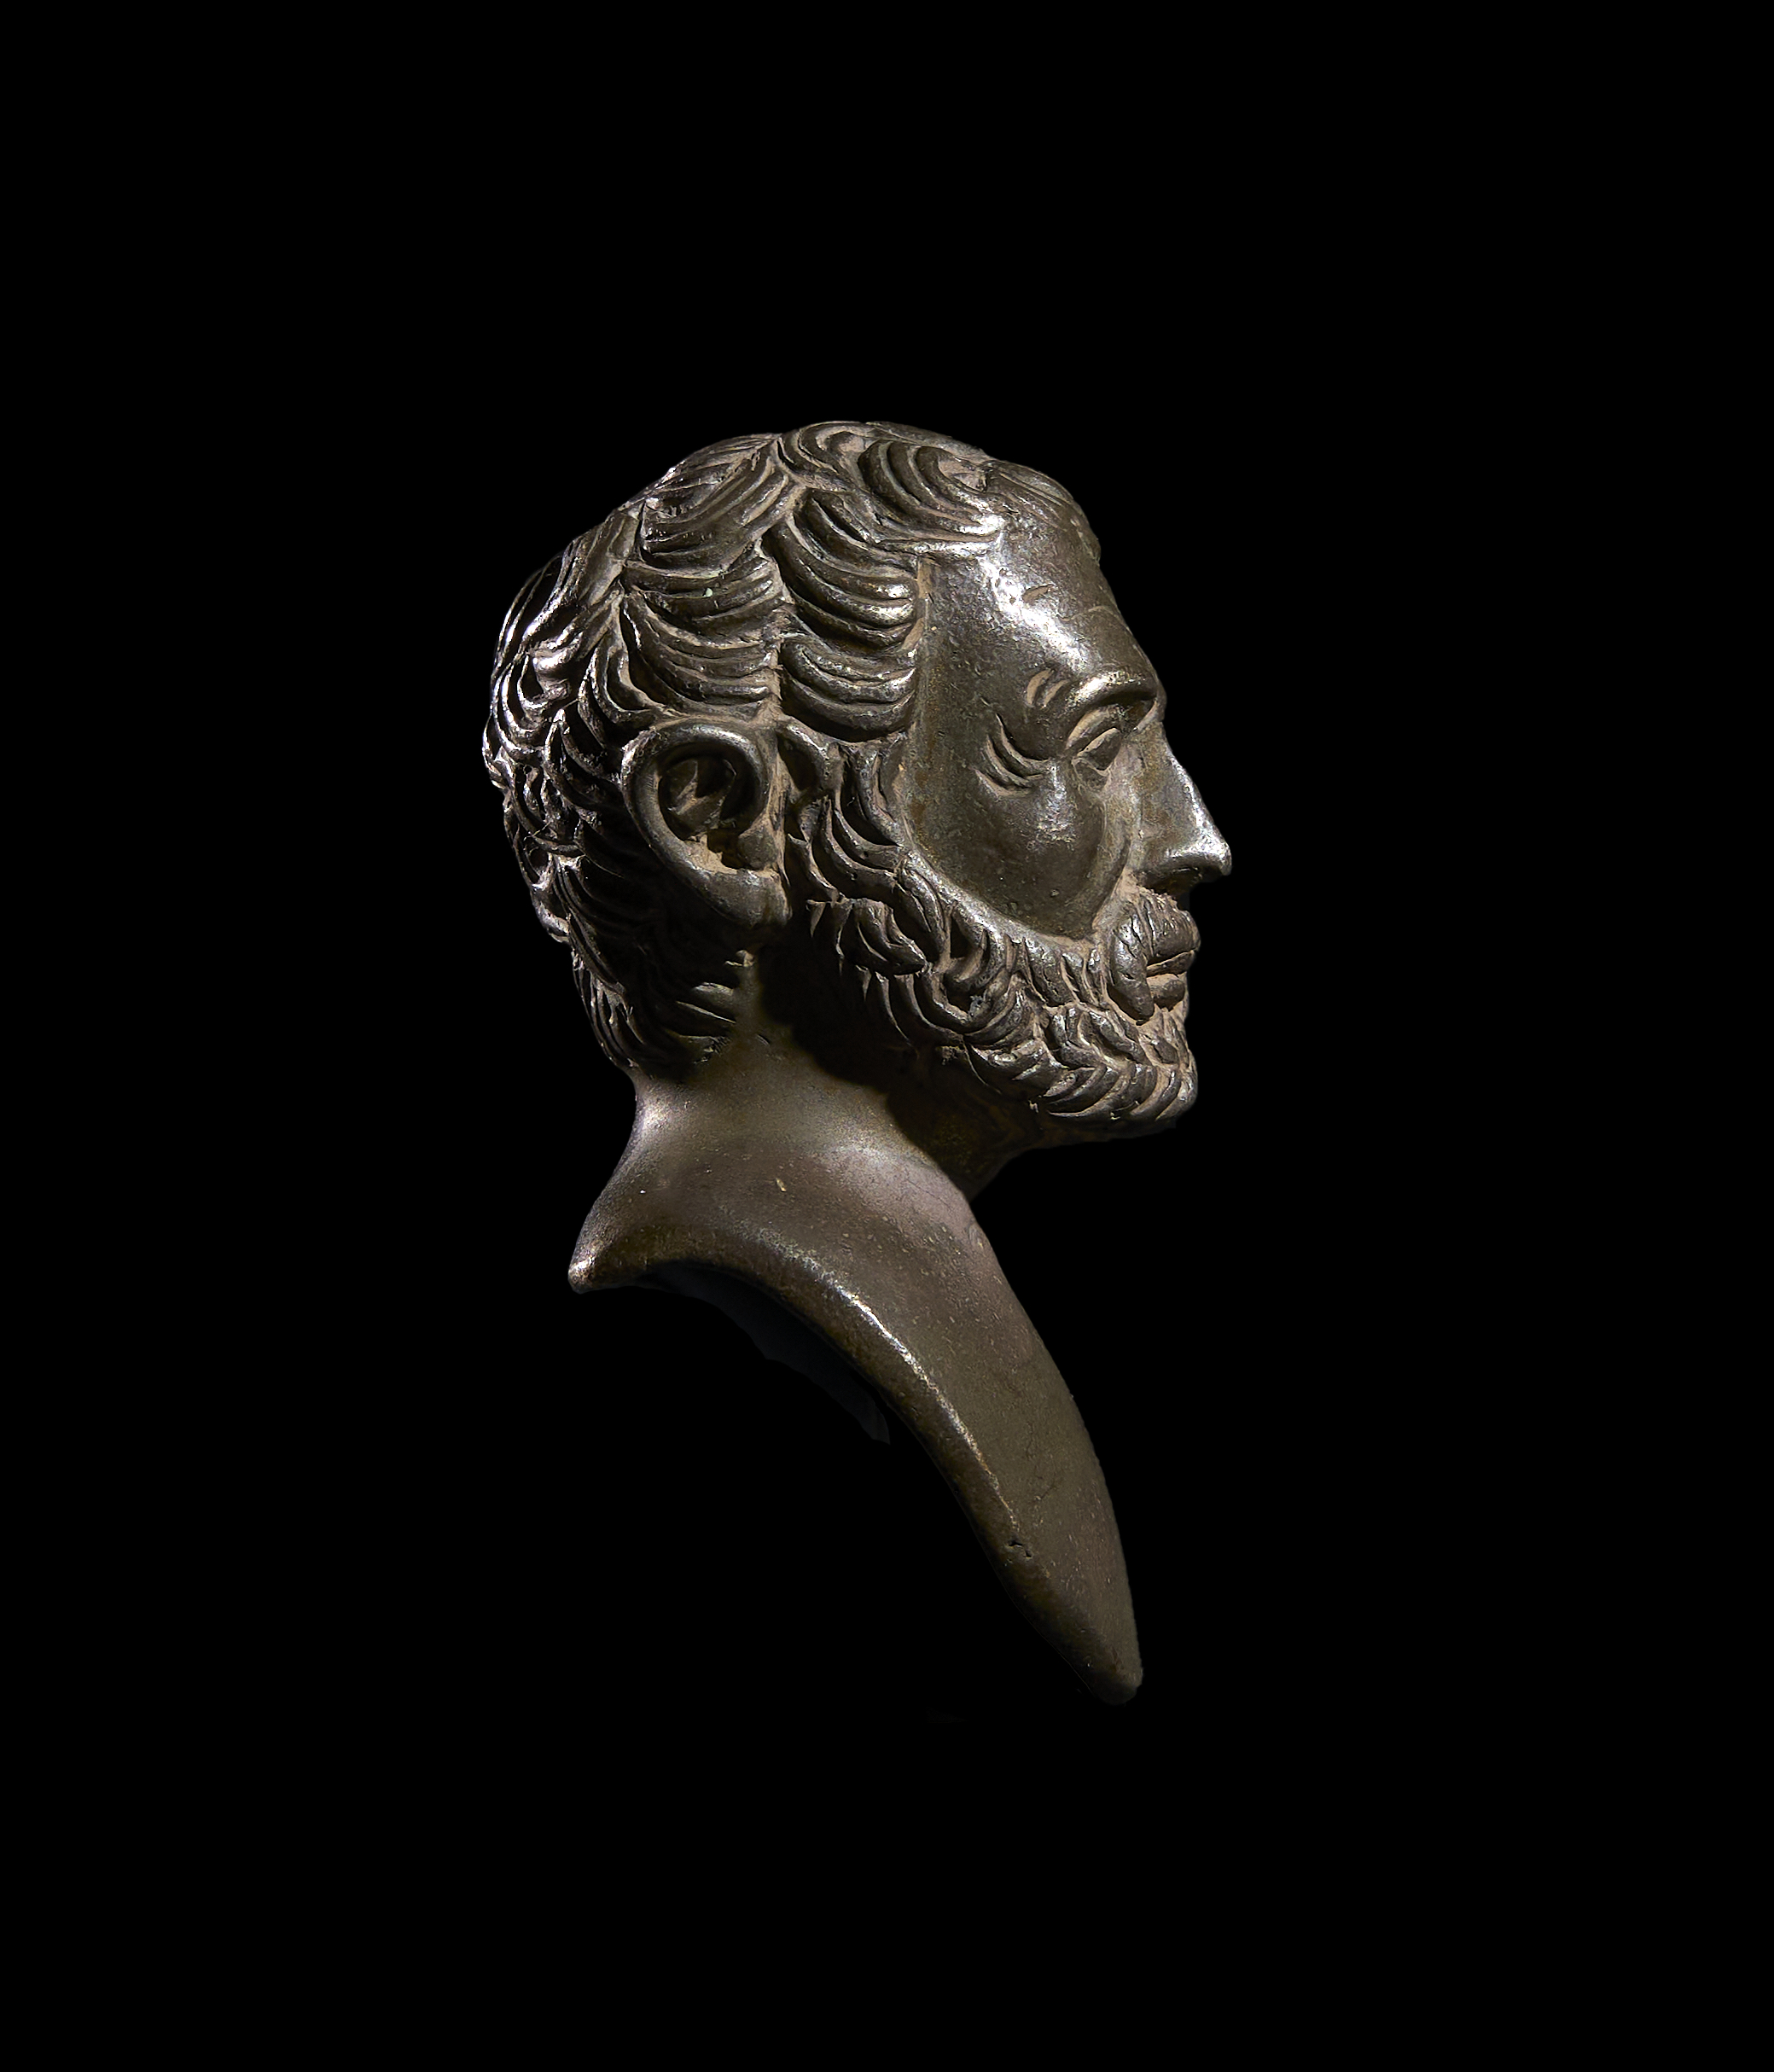 A SILVER BUST OF A NOBLE MAN, PROBABLY GRAND TOUR, 17TH/18TH CENTURY - Image 2 of 2